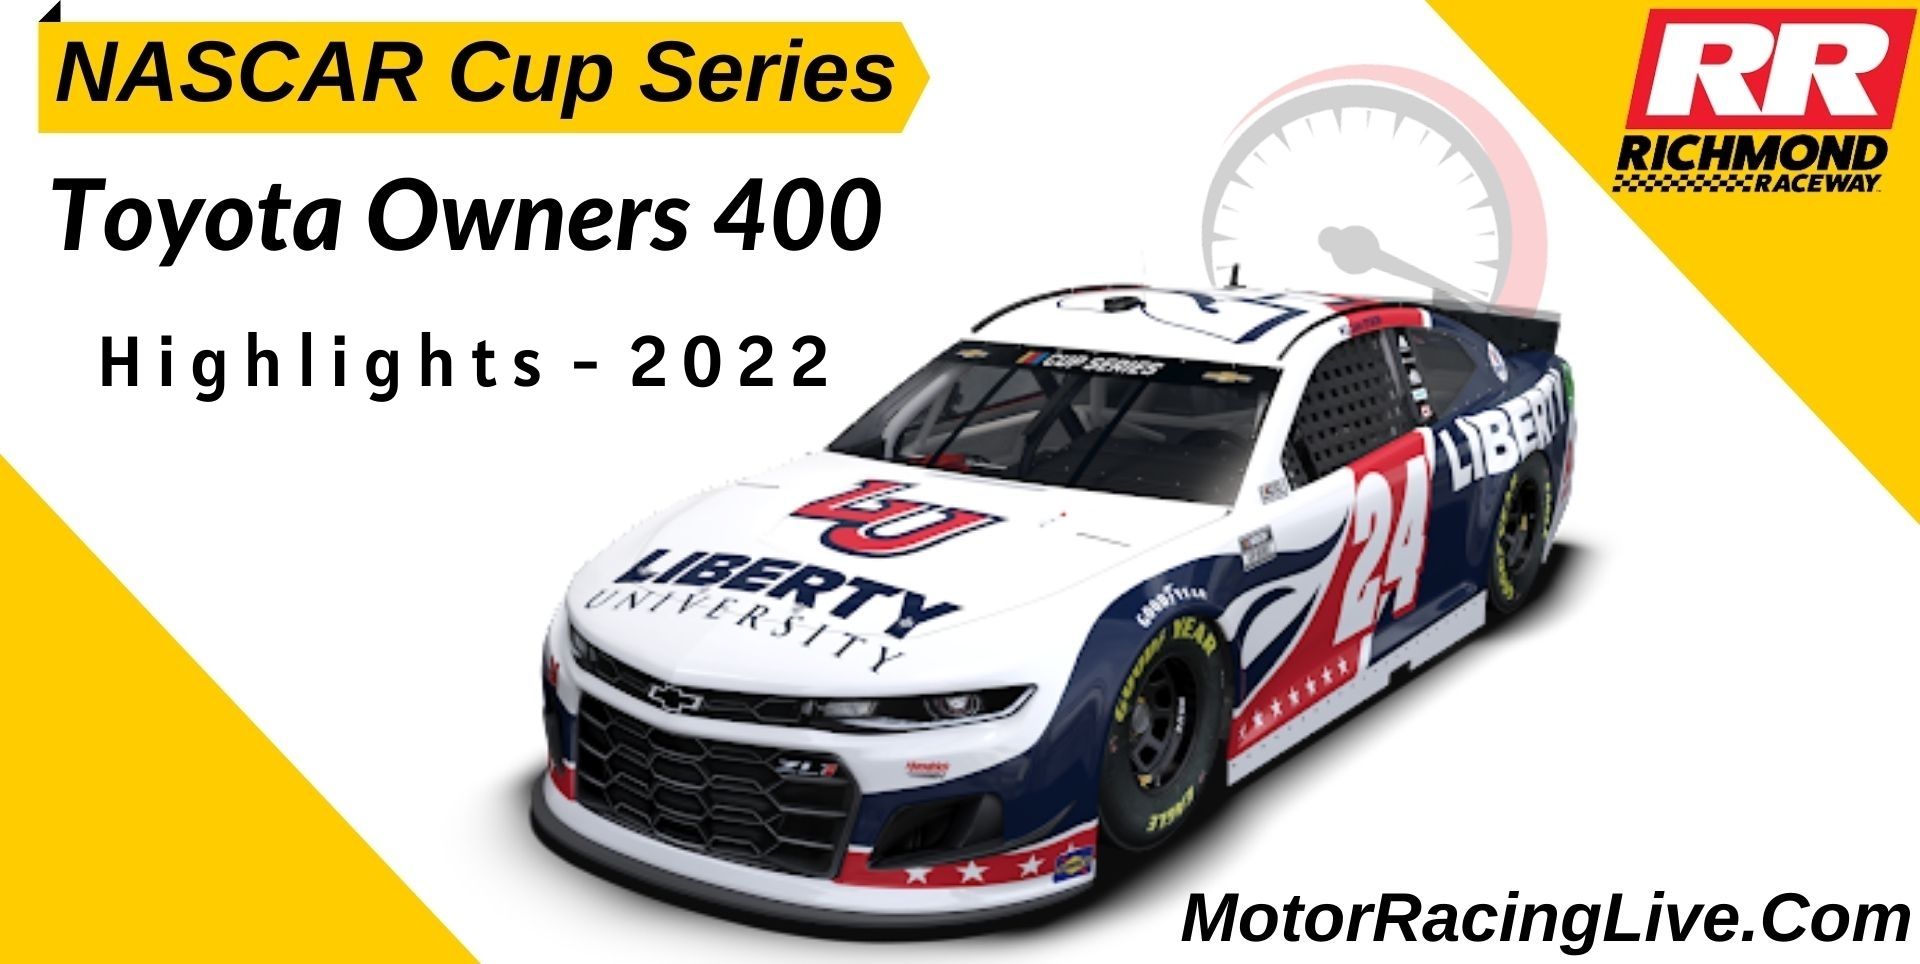 Toyota Owners 400 Highlights 2022 NASCAR Cup Series